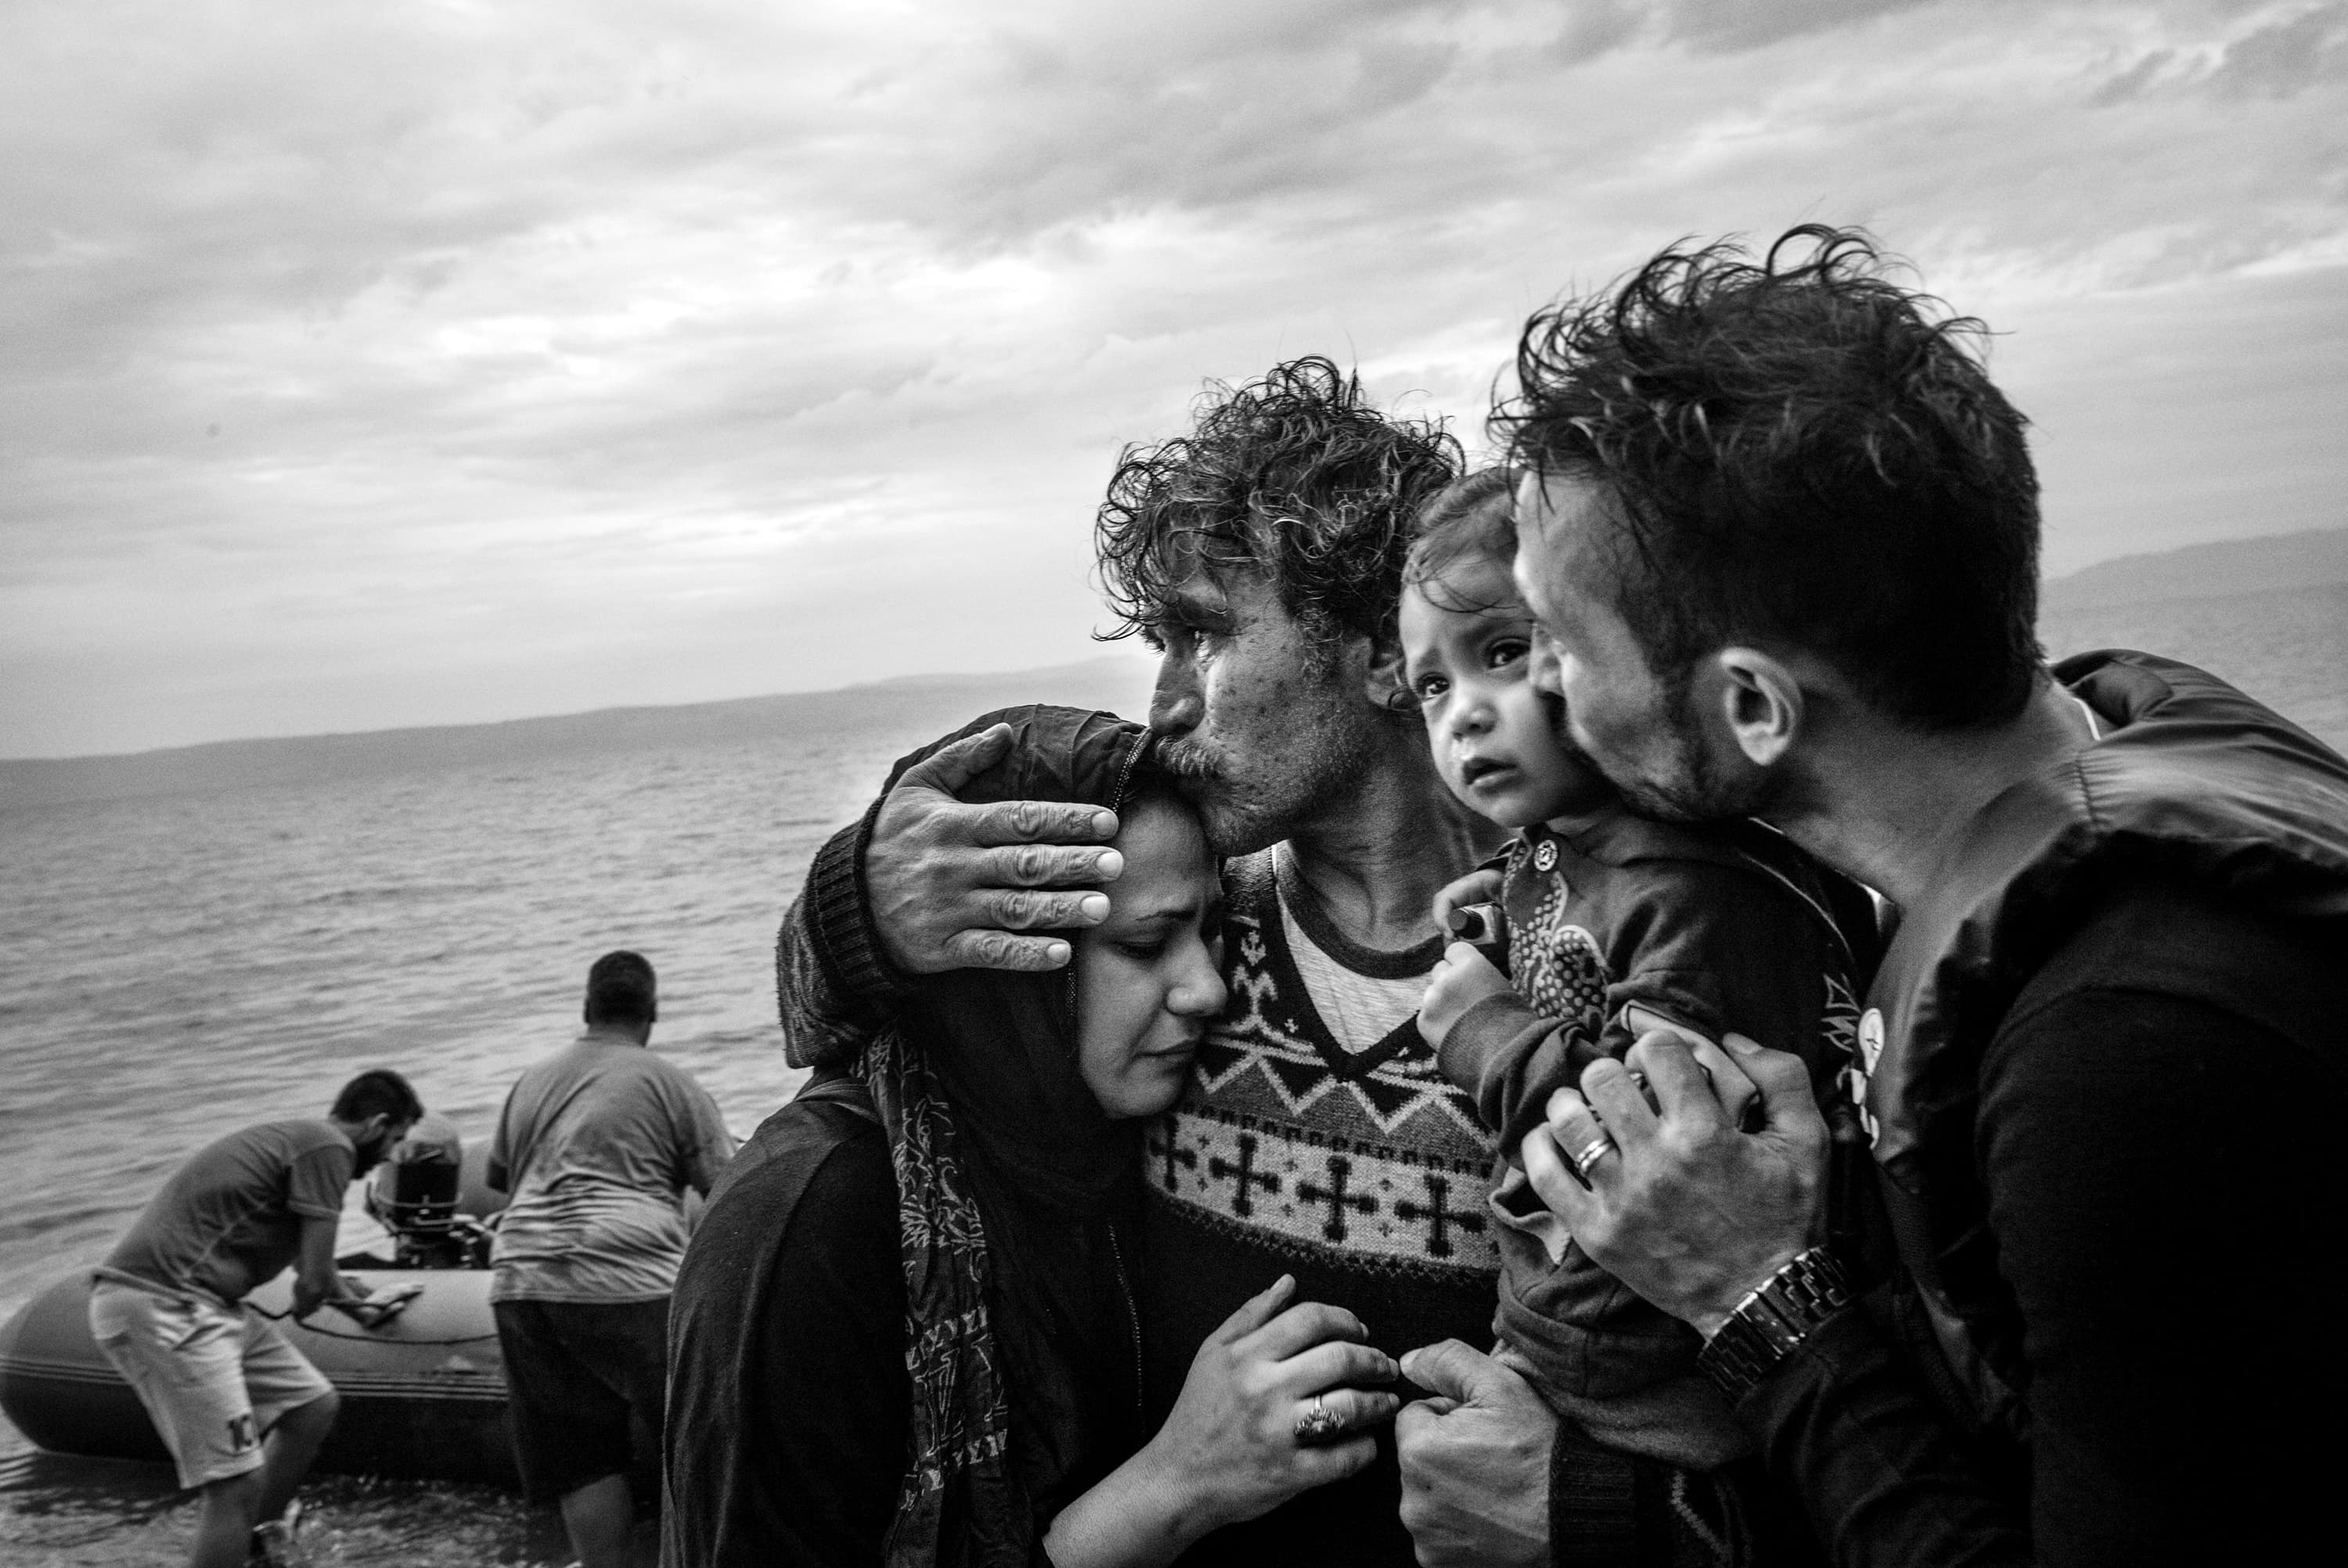 A Syrian family weeps tears of joy after reaching, on a rubber boat from Turkey, the village of Skala Sykaminias  located on the northeastern Greek island of Lesbos, on October 10, 2015. Thousand of refugees, mostly coming from Syria, Iraq and Afghanistan, cross everyday the Aegean sea from Turkey to reach Europe: a relatively short but extremely perilous journey. According to the UN Refugee Agency, more than 850 000 arrivals by sea were registered in Greece in 2015.